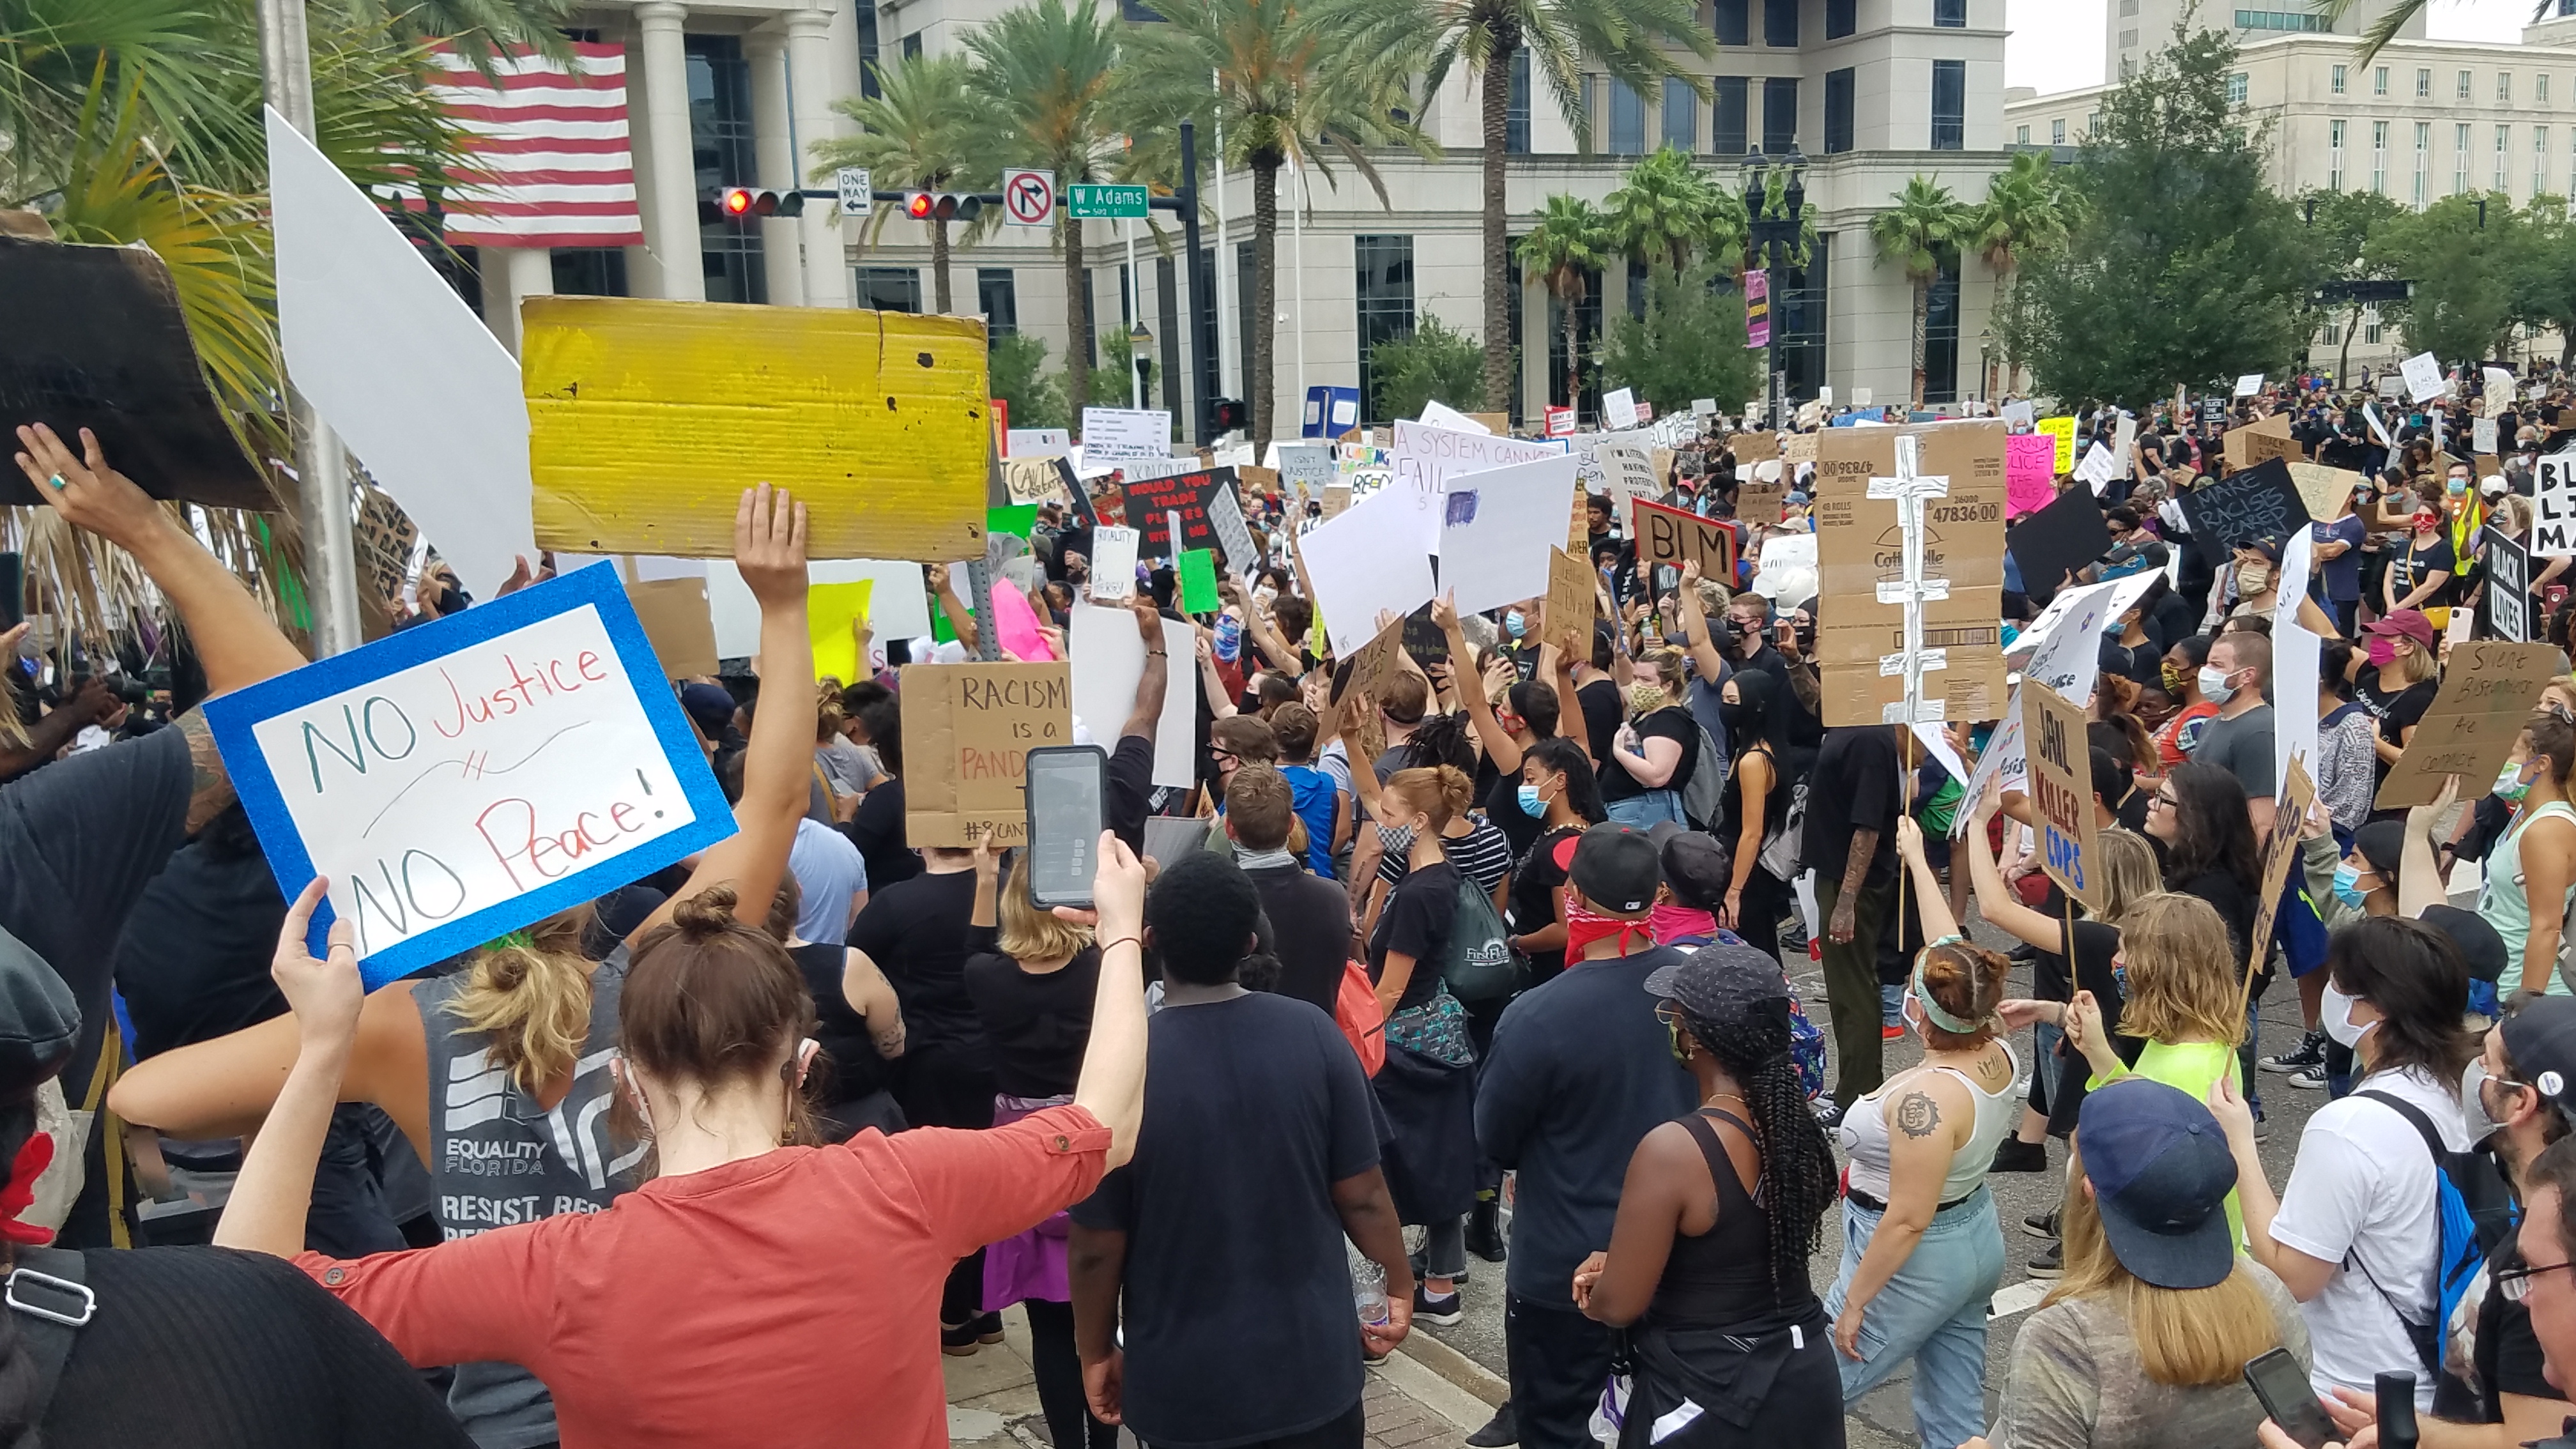 Black Lives Matter Protest; Jacksonville: The June 6 march in Downtown Jacksonville was one of the largest civil rights events in the city's history